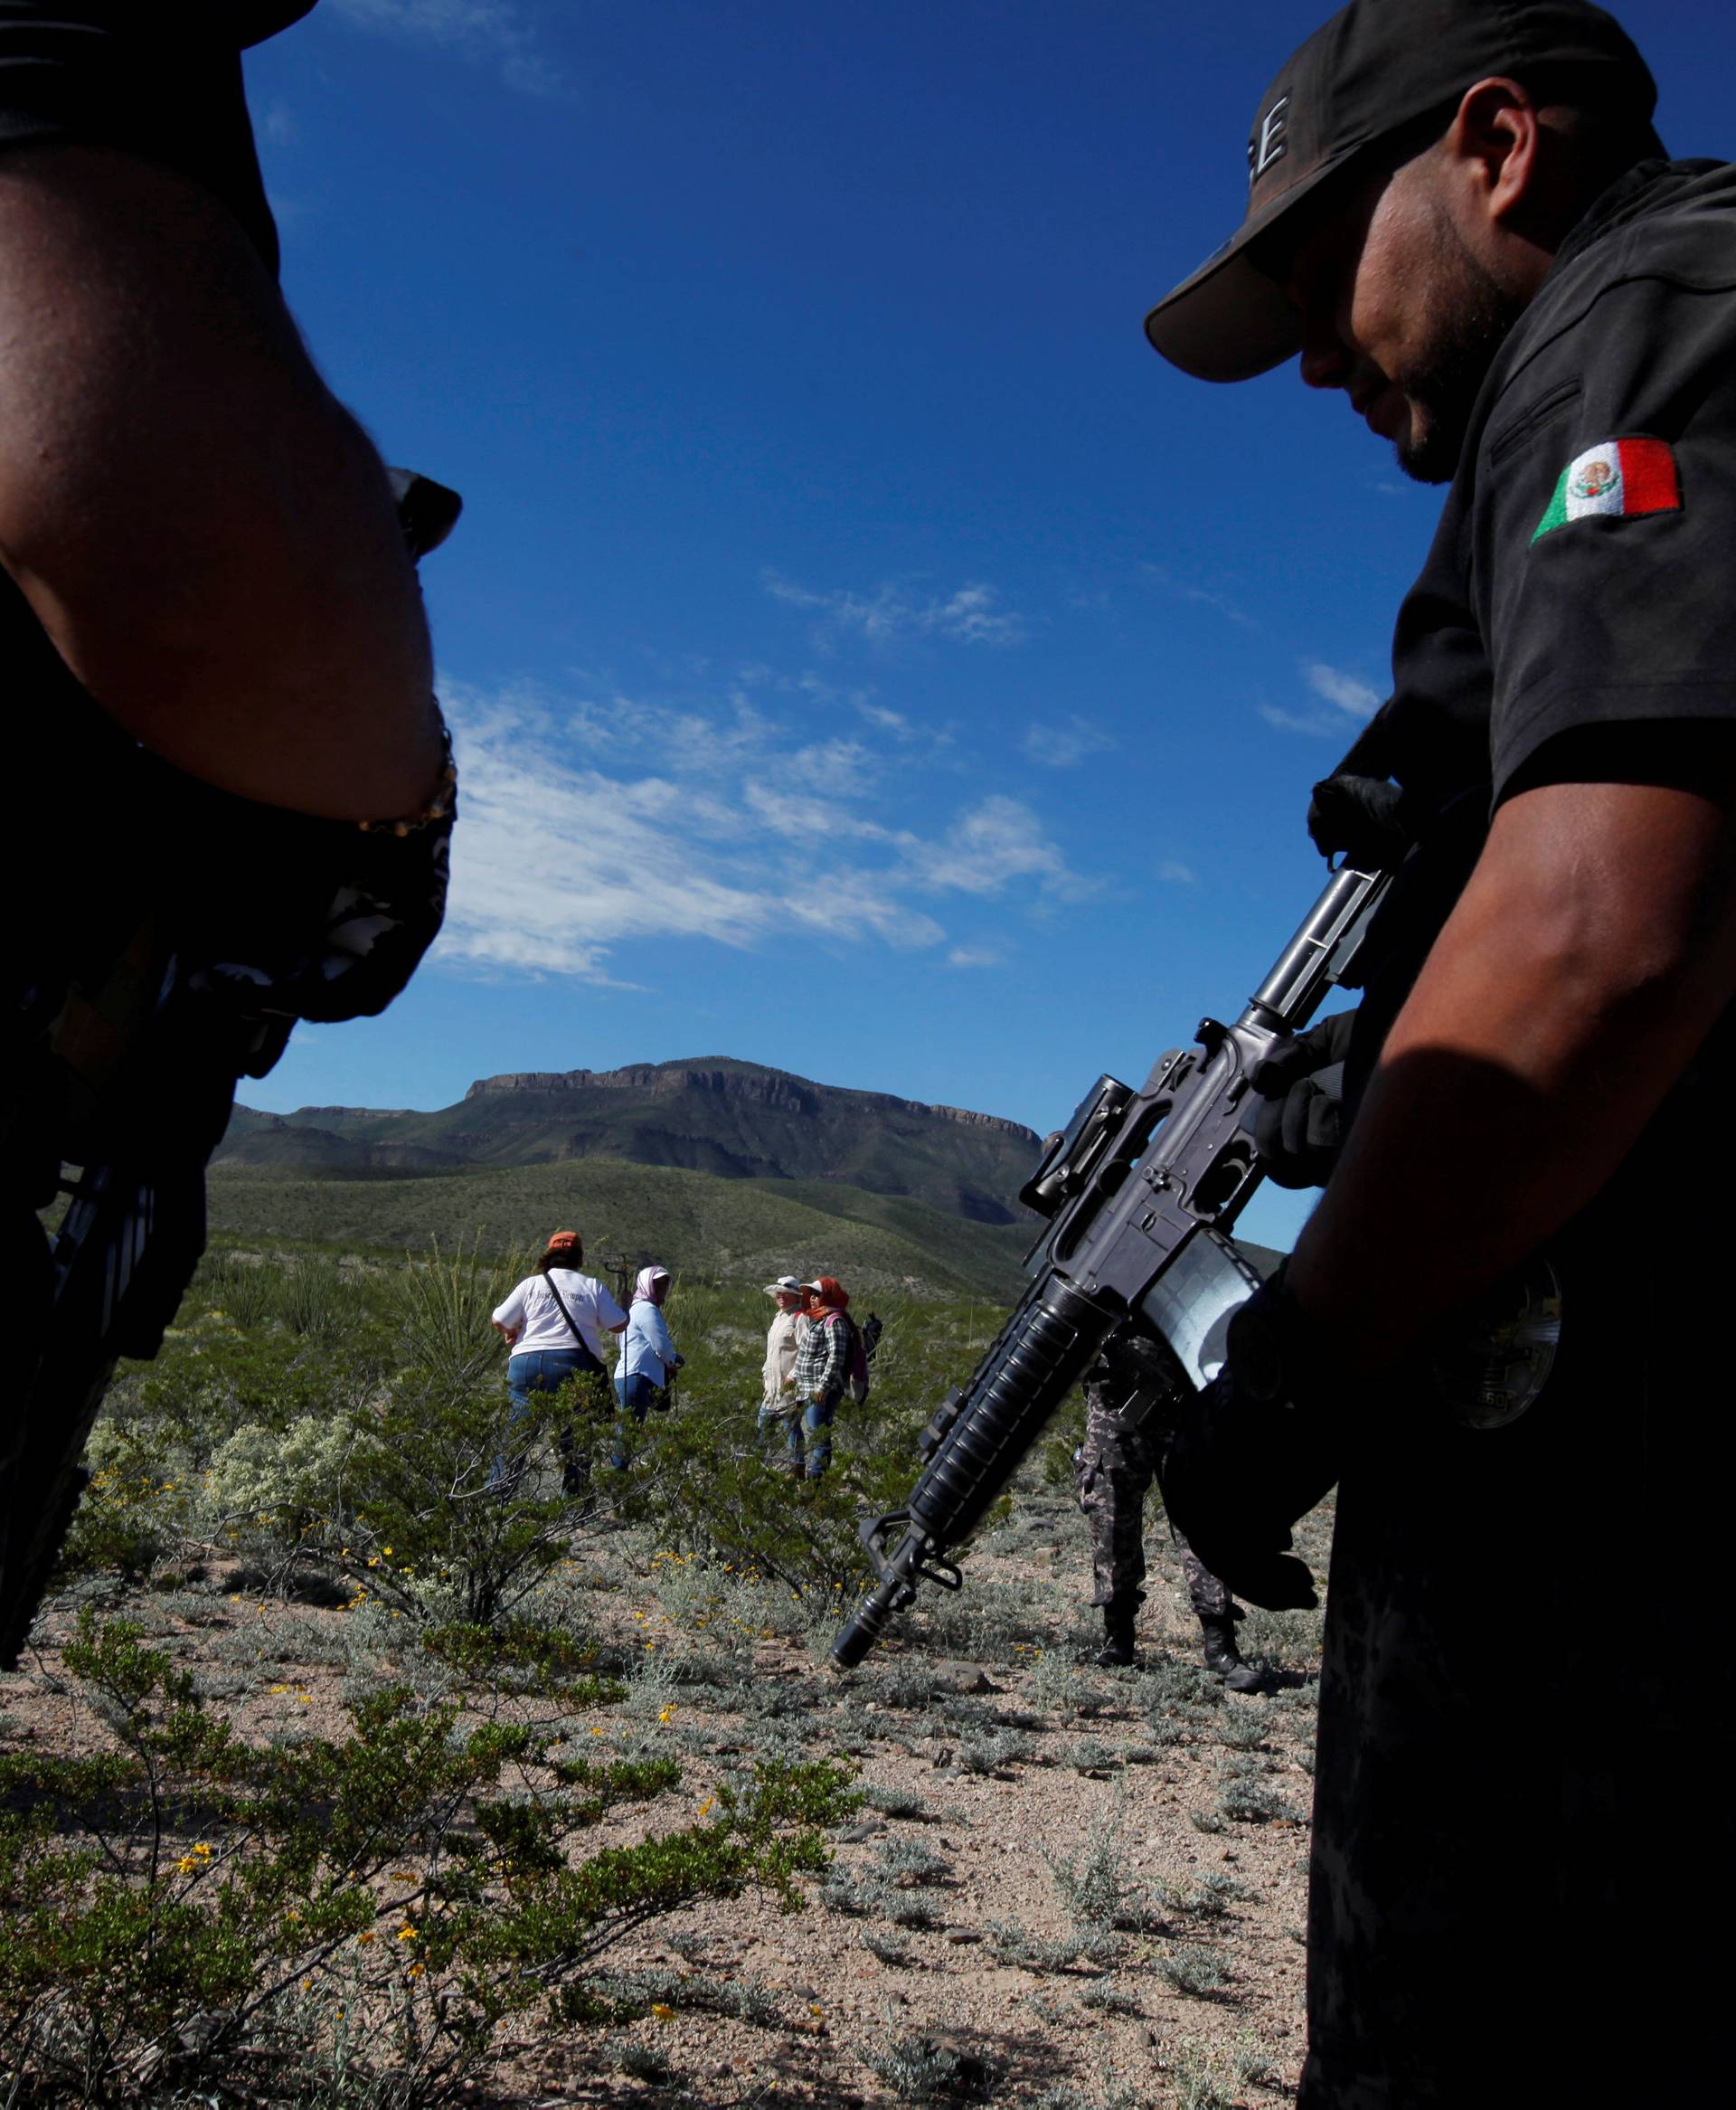 Members of Civil and Human Rights Organisations, accompanied by police officers and forensic technicians, search in the Juarez Valley for remains of women who have gone missing in the past years, on the outskirts of Ciudad Juarez